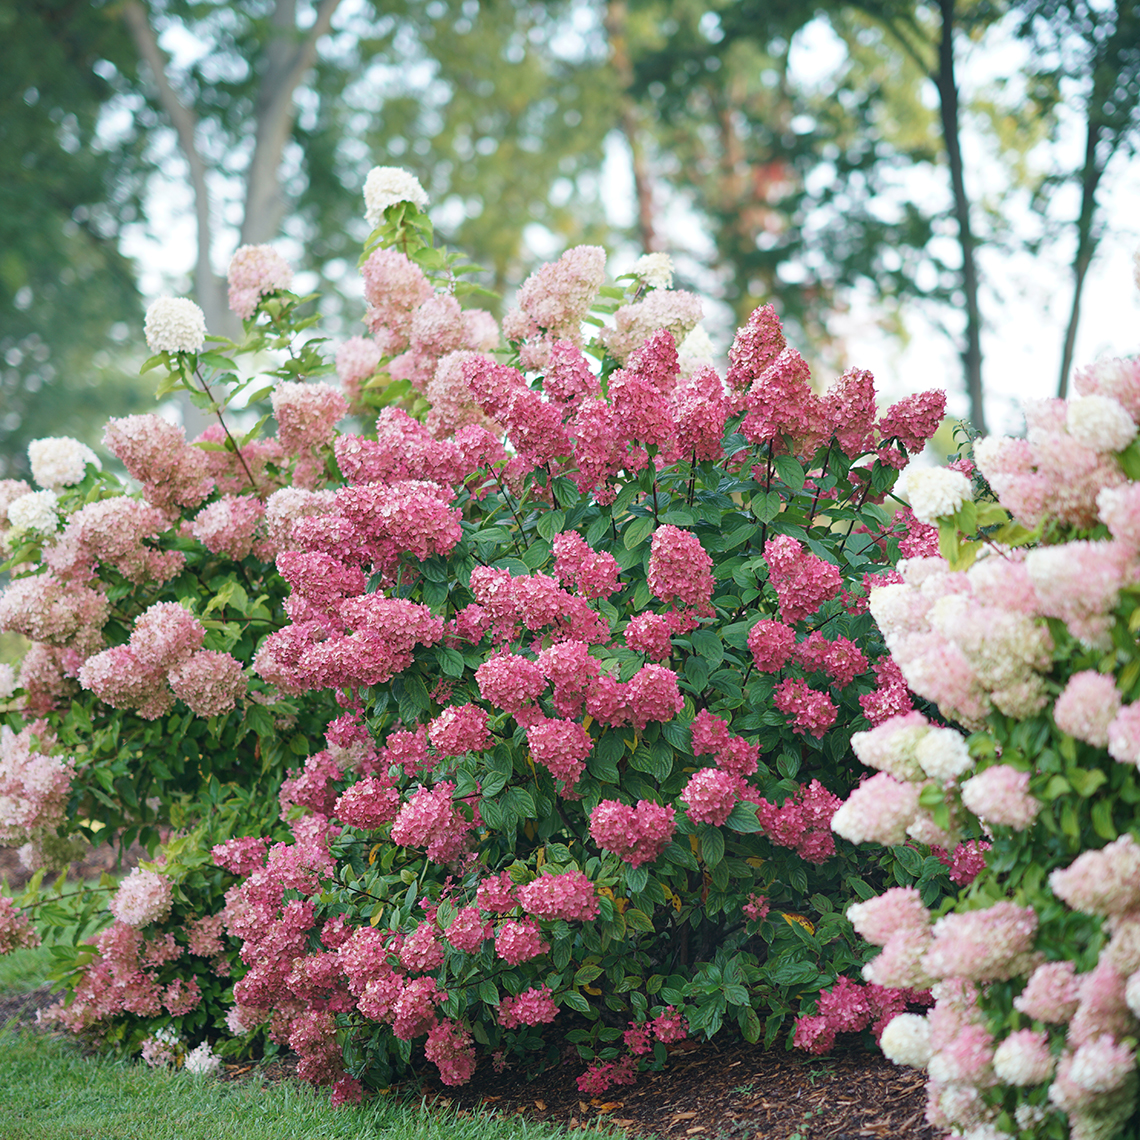 Fire Light panicle hydrangea blooming in a landscape covered in red mophead blooms